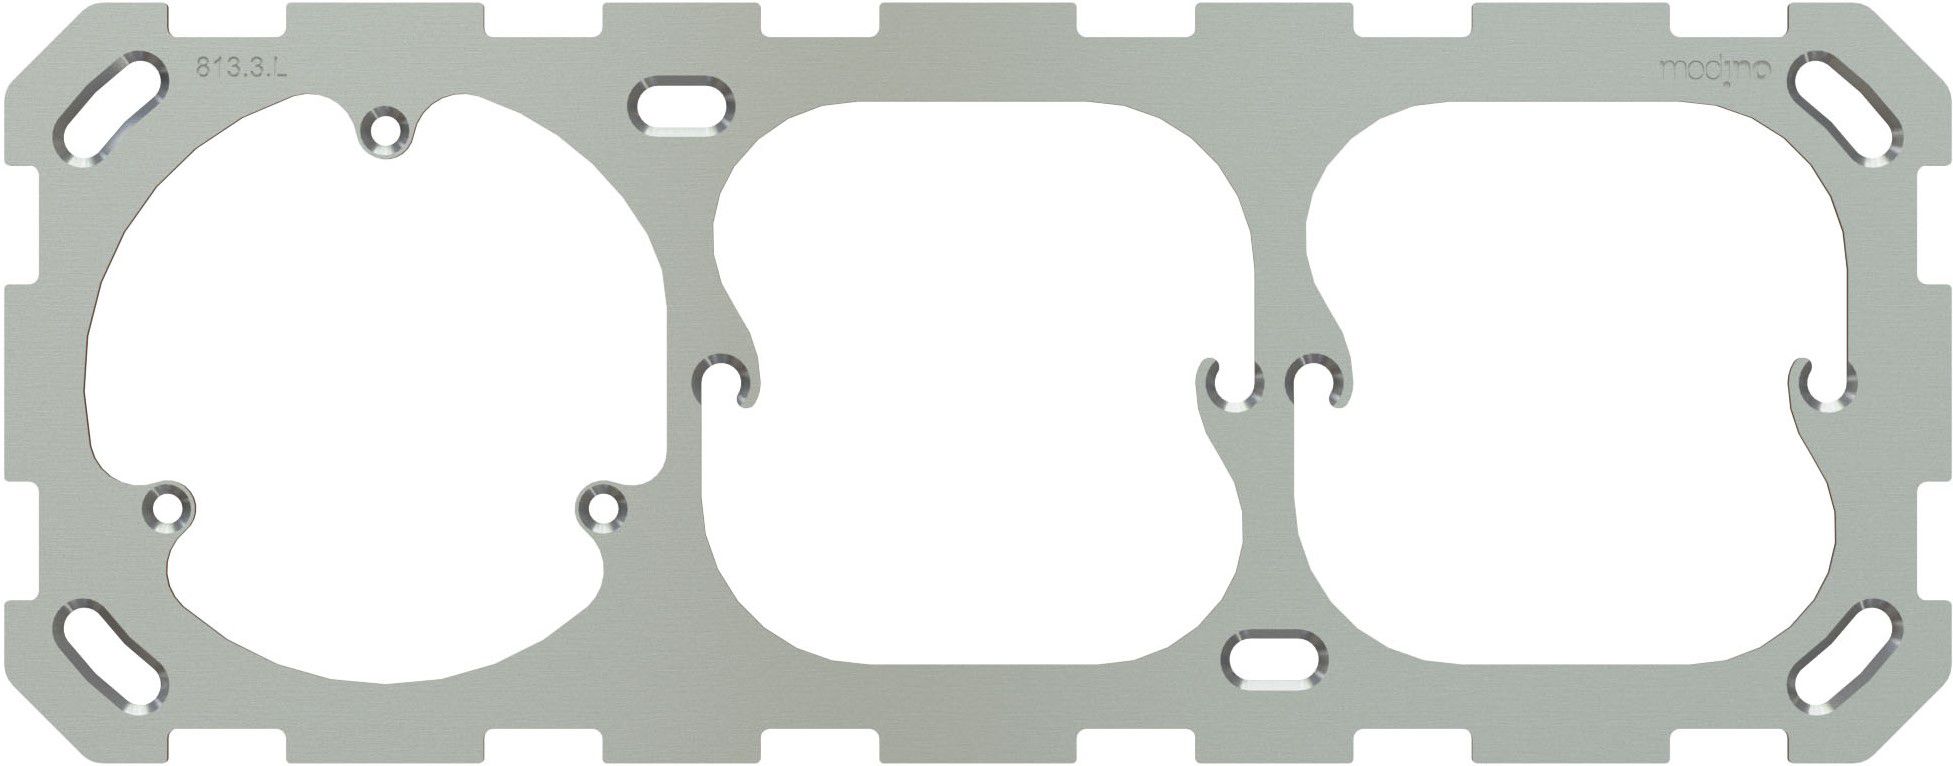 Fixing plate size 1x3 for socket 3x type 13